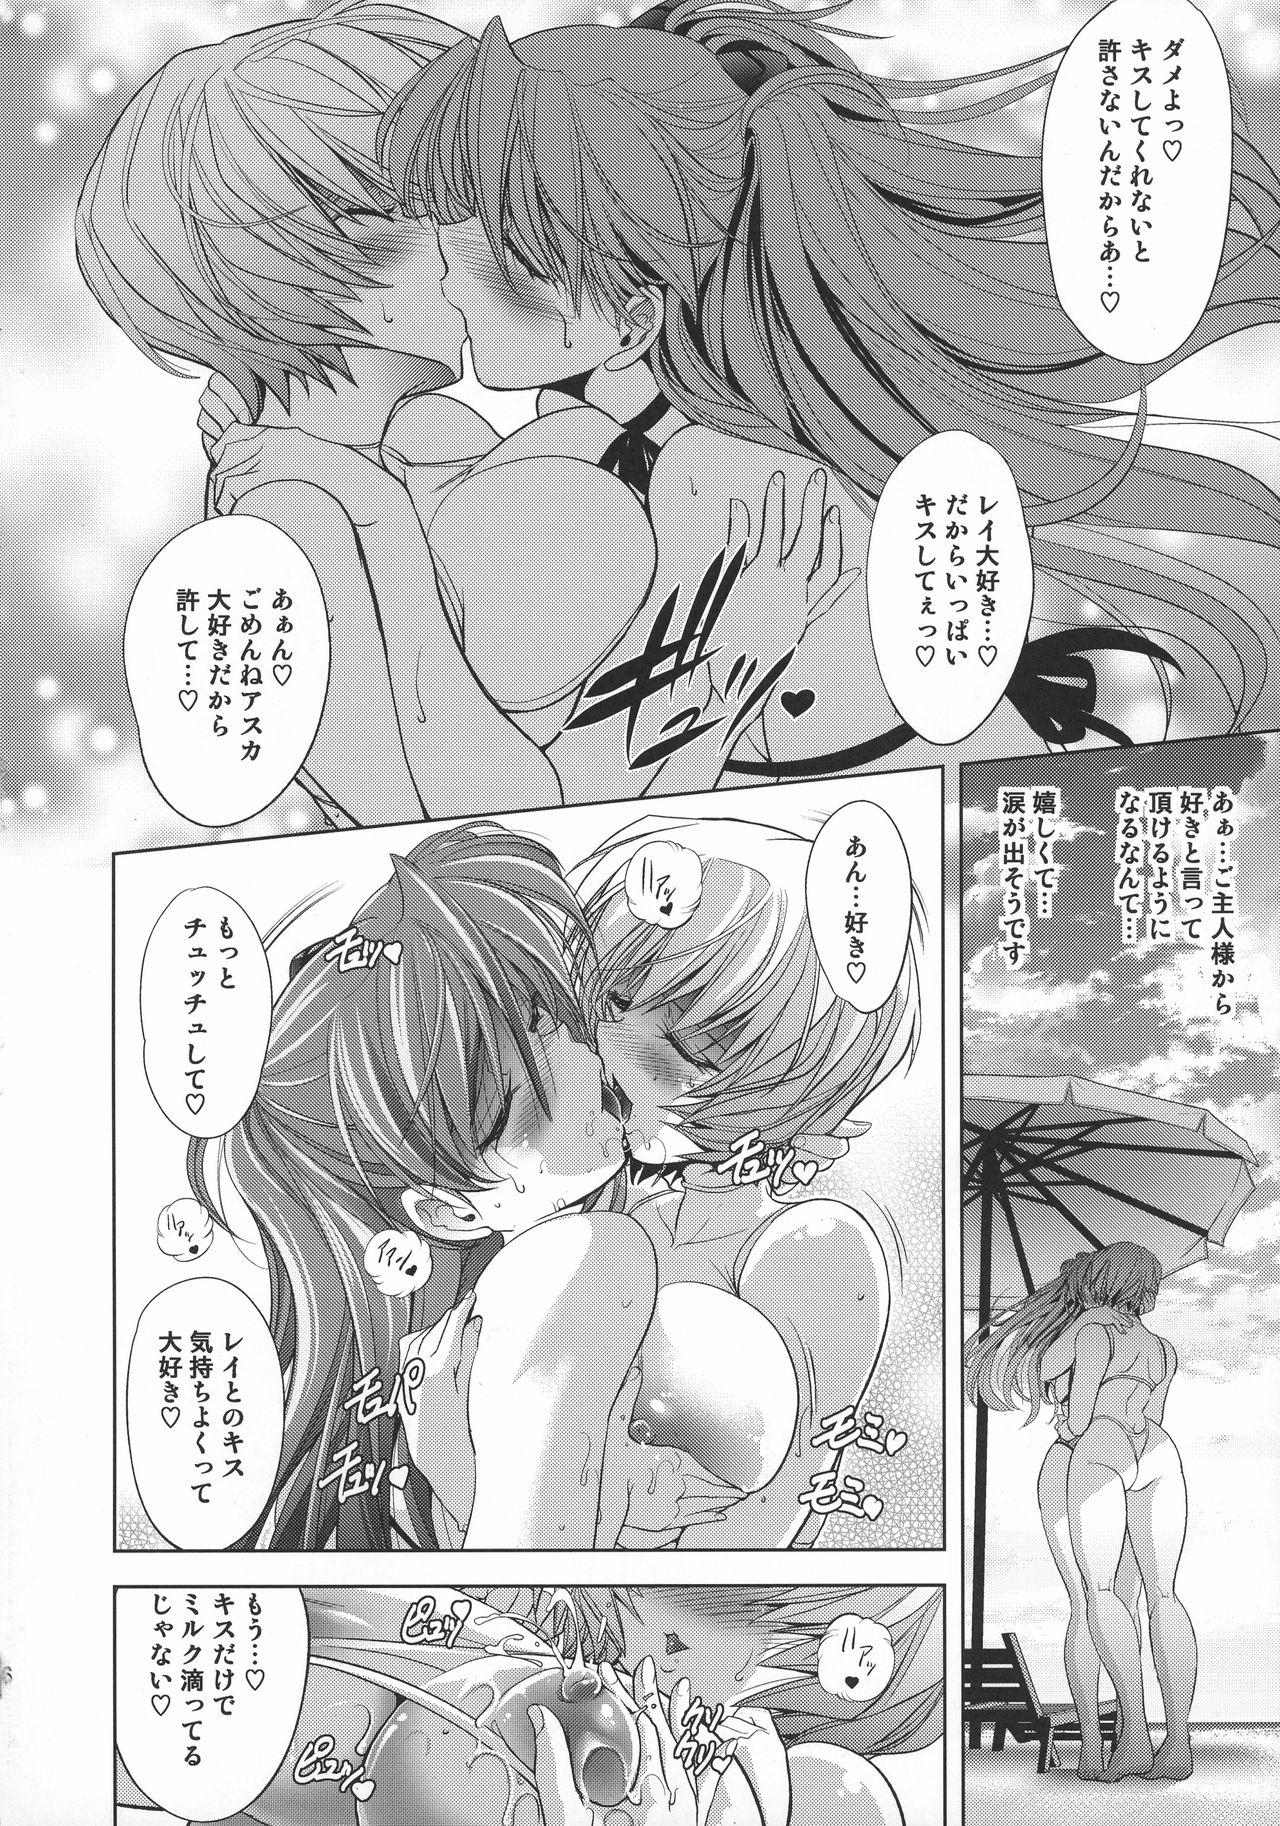 Fuck Com Lovey Dovey - Neon genesis evangelion Fuck My Pussy - Page 7